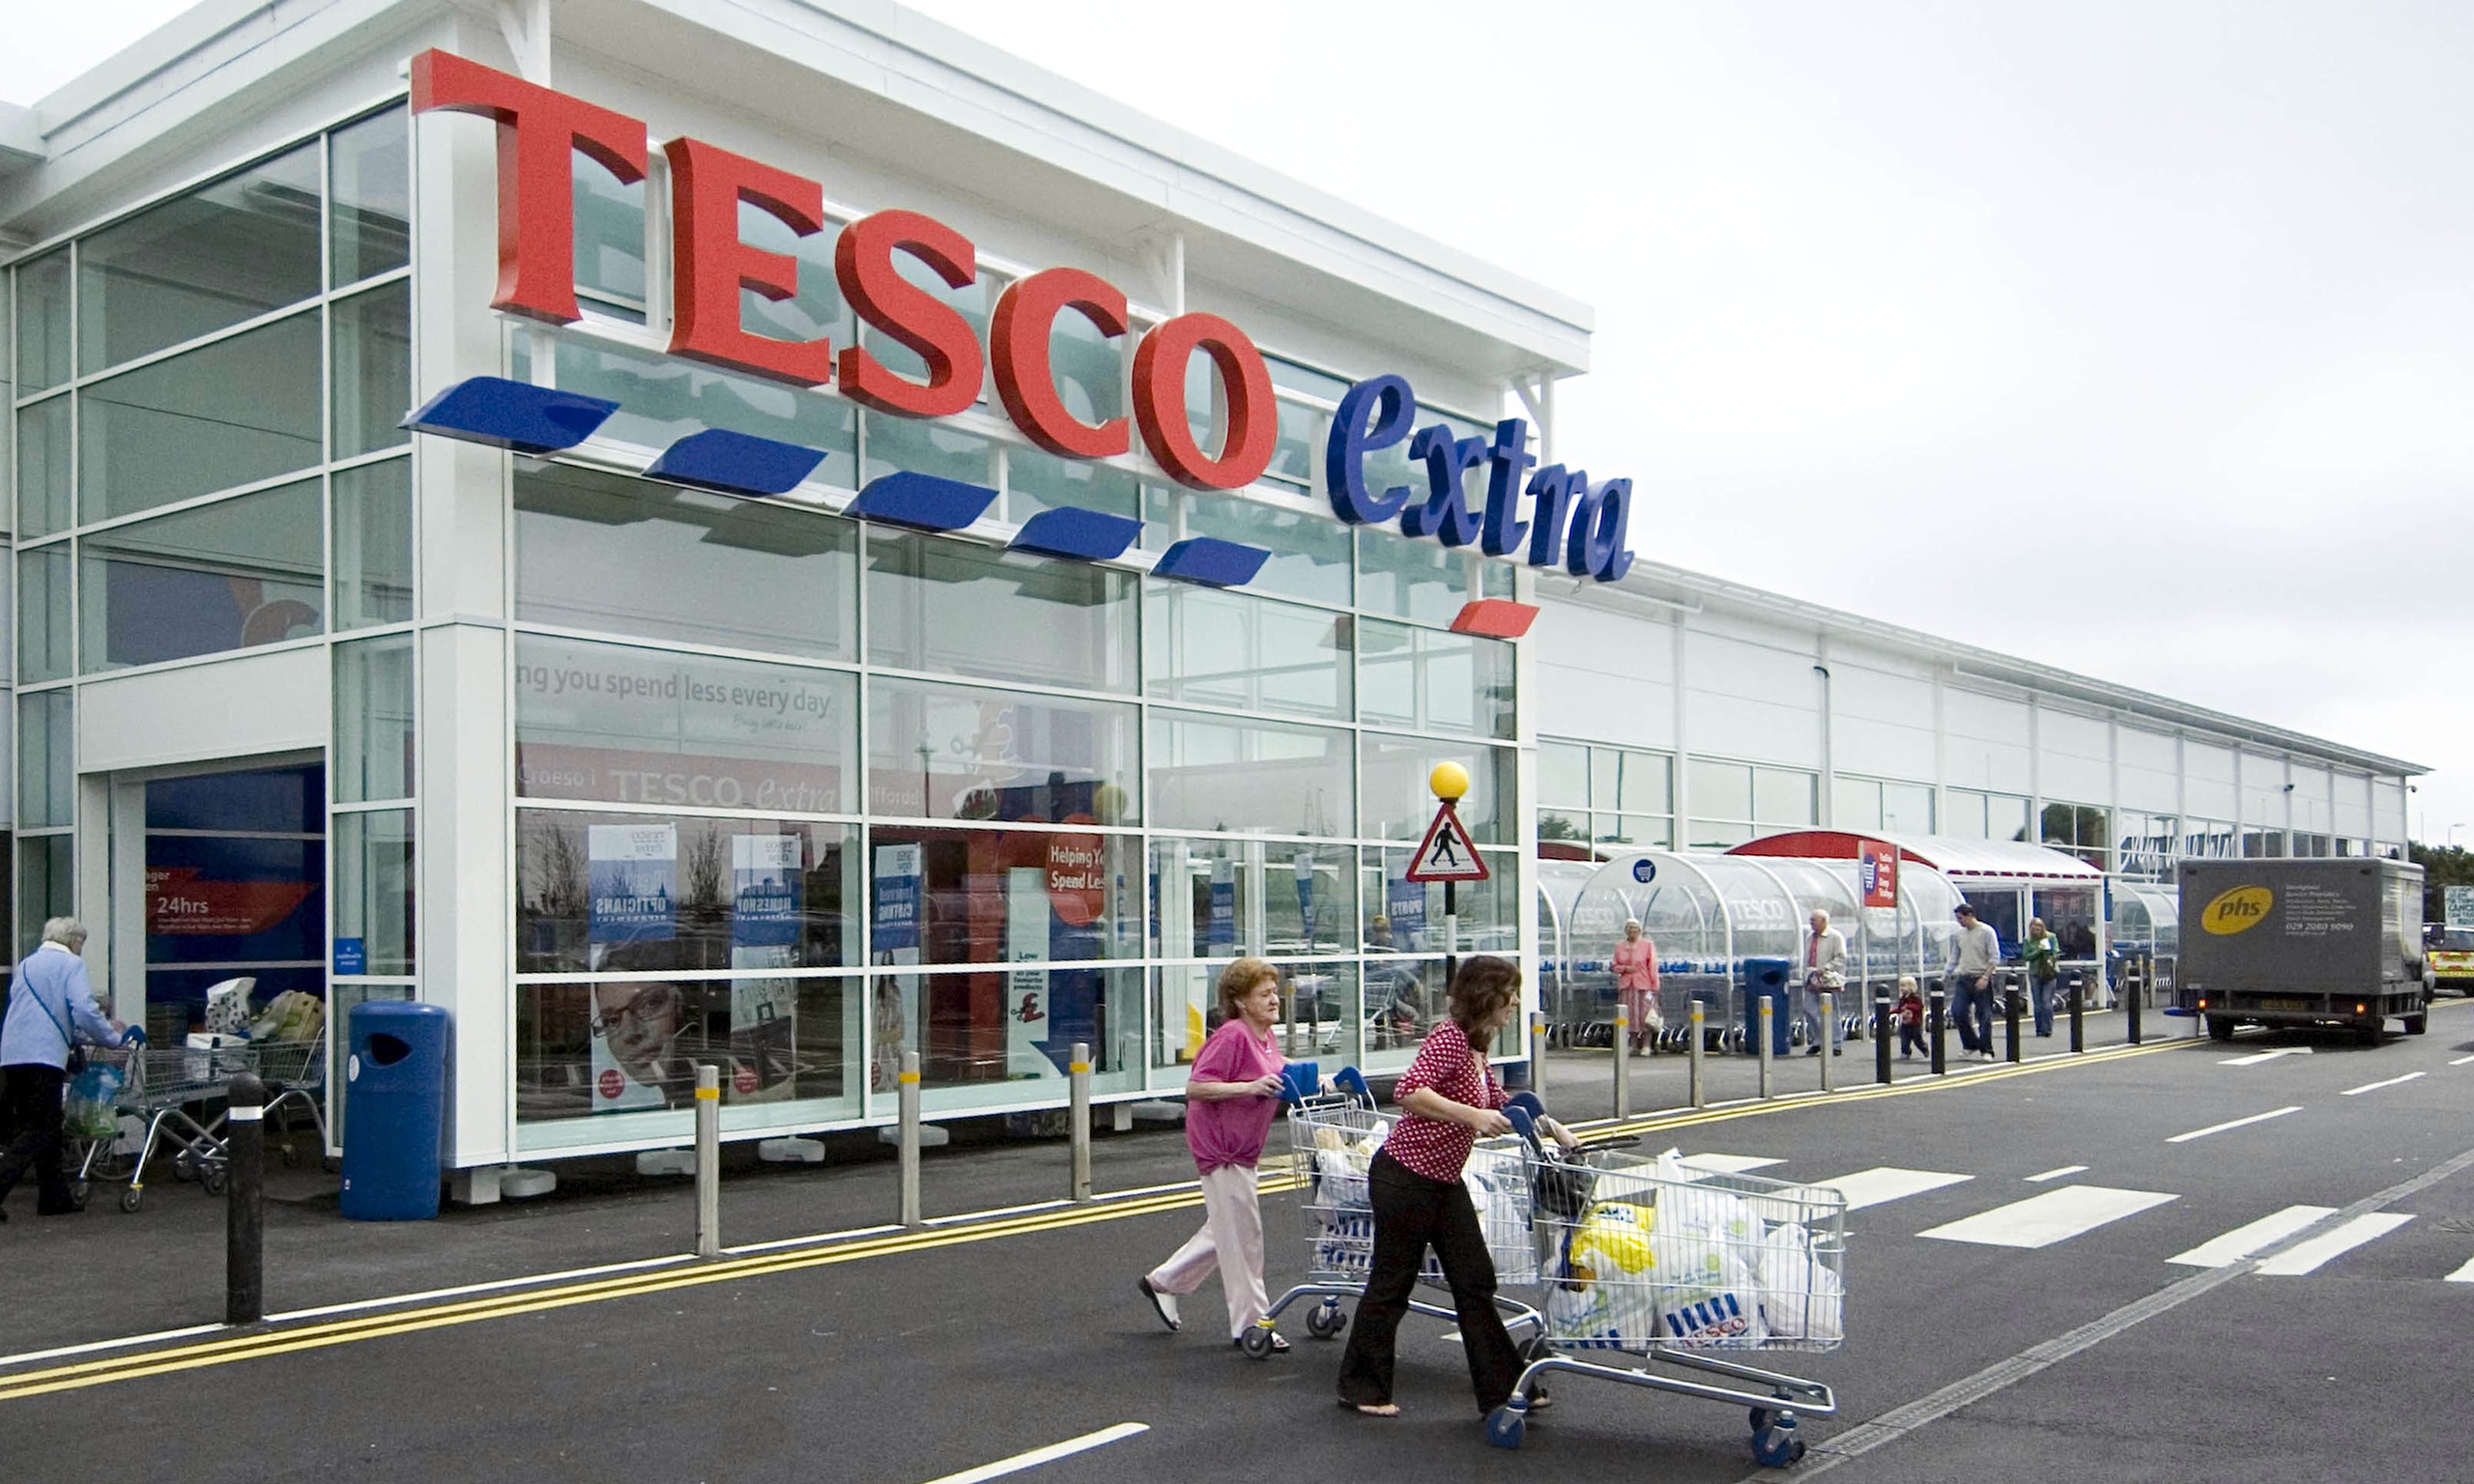 Tesco-Extra-store-in-Have-014.jpg